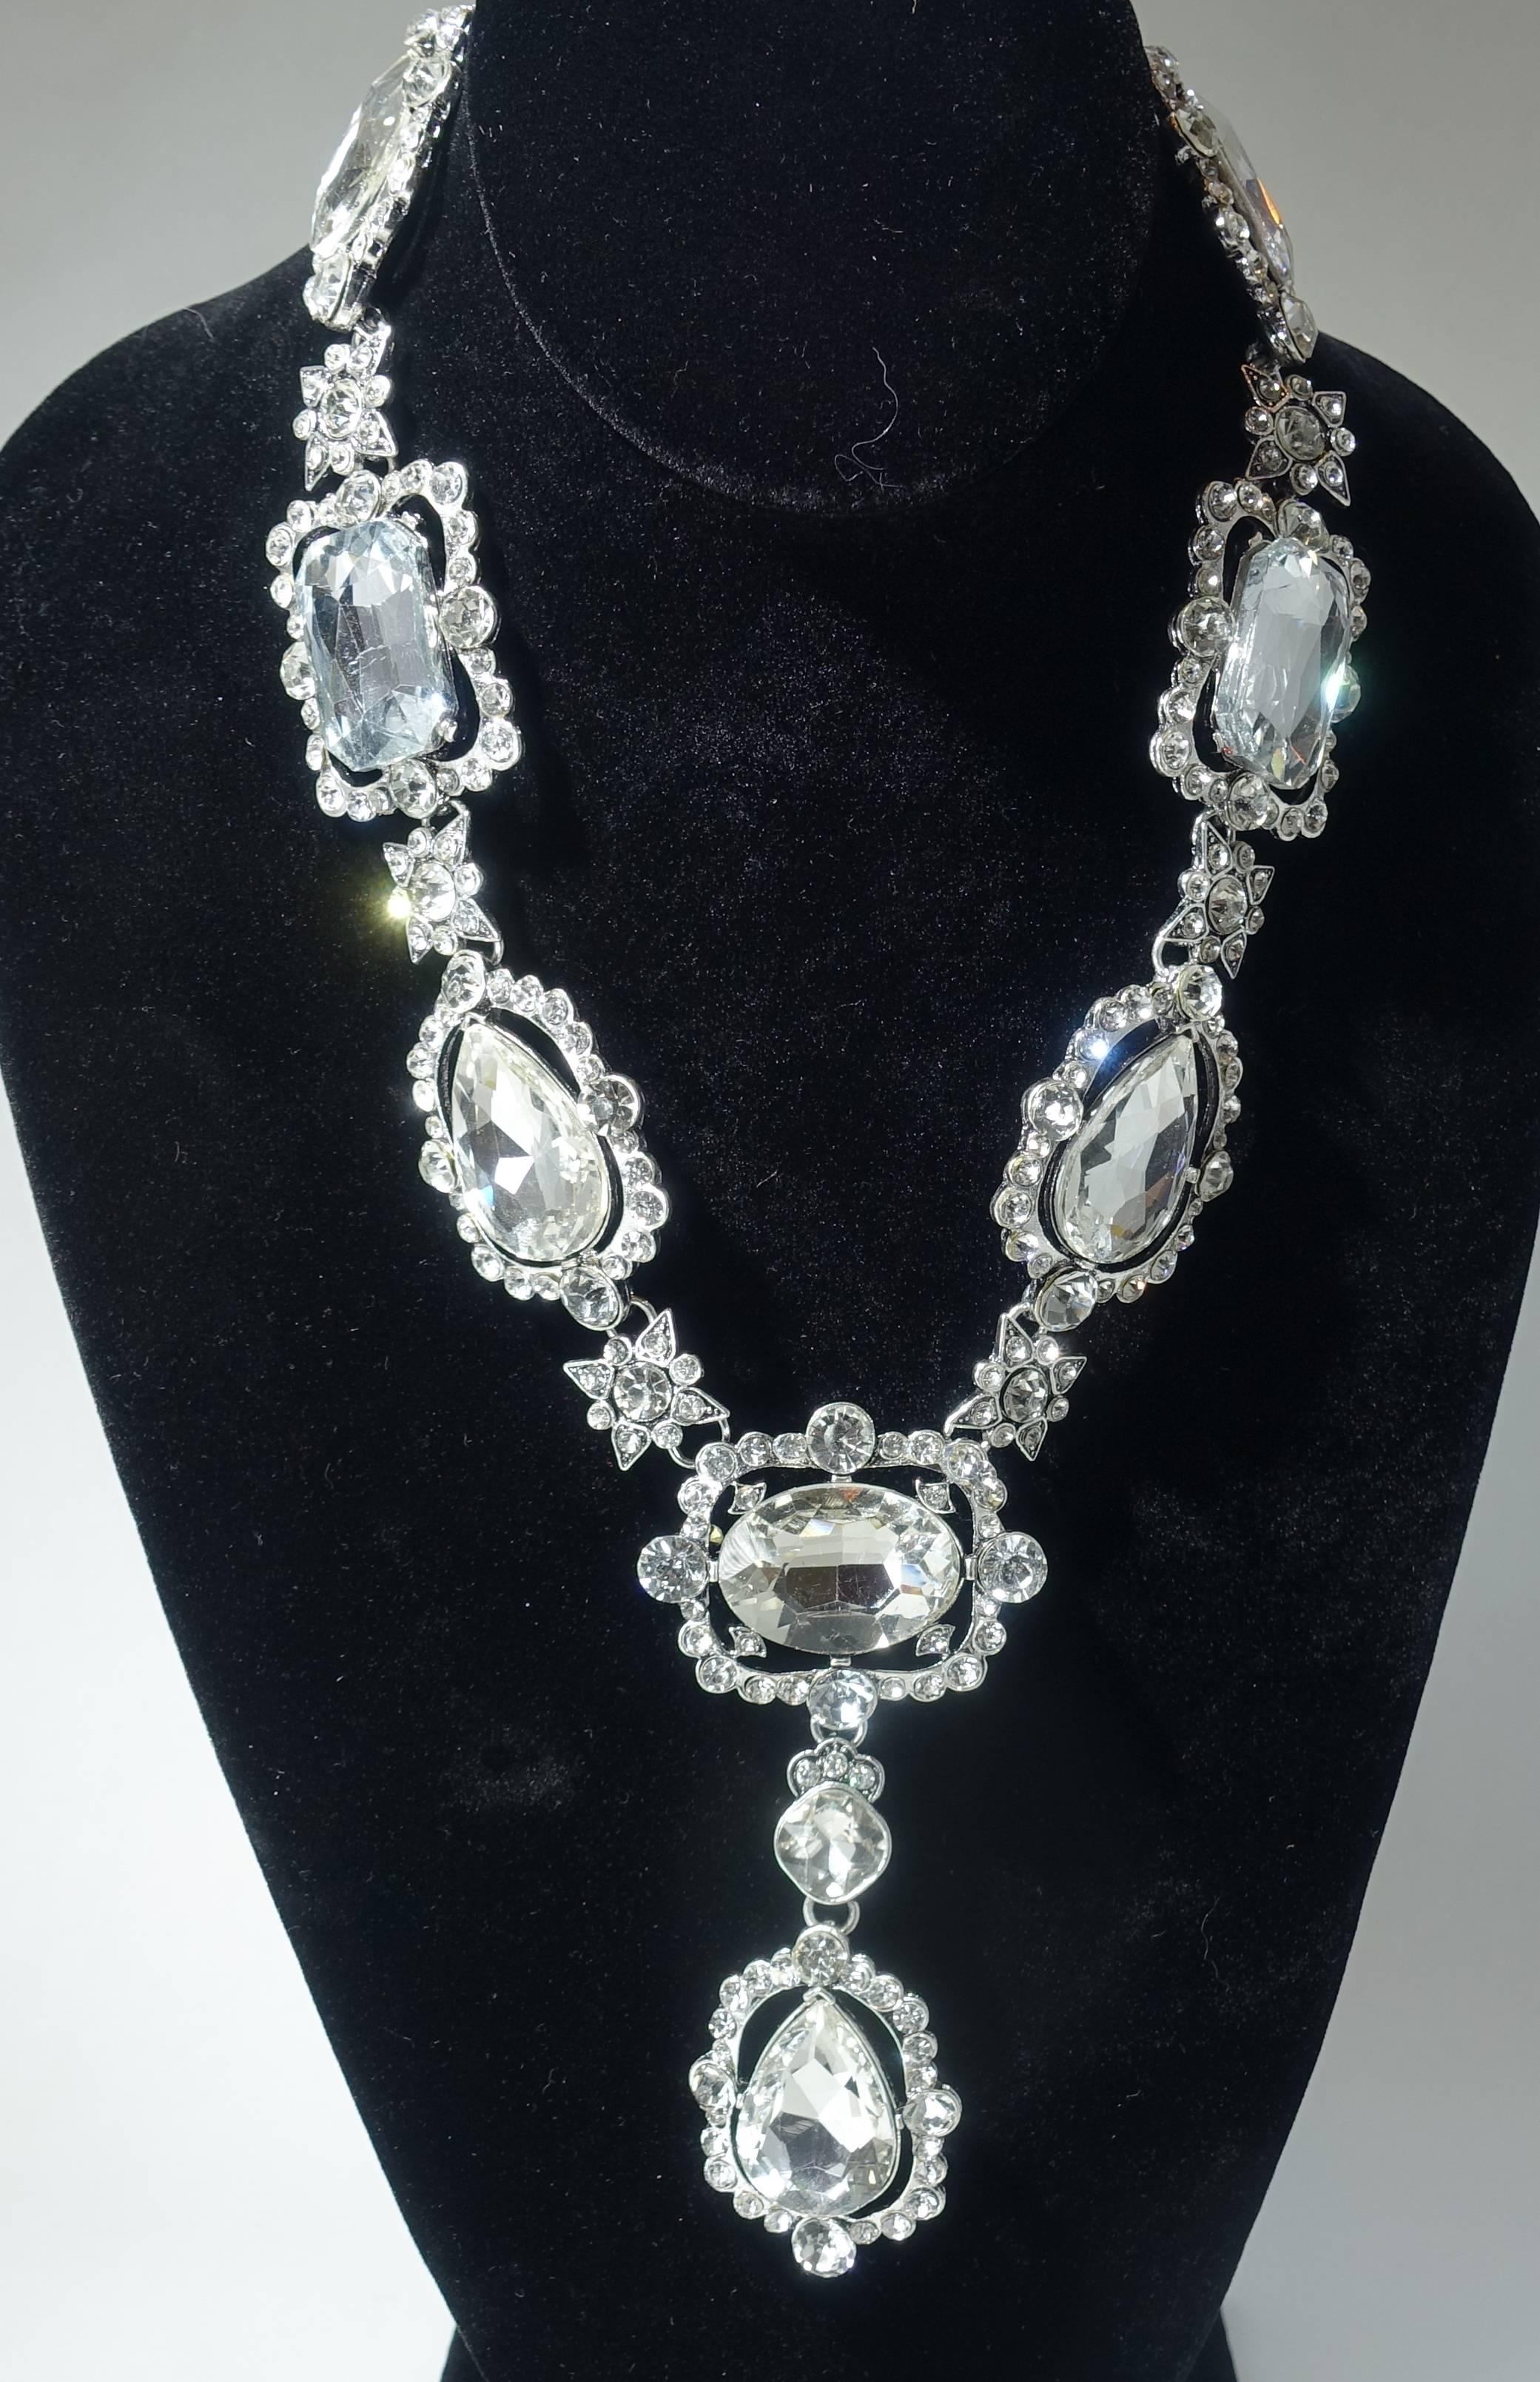 This Oscar de la Renta necklace is perfect for a wedding or any other celebration. This glitzy necklace has clear crystals in a silver tone setting.  This necklace measures 19” long with a spring closure x 1-1/4” and the front drop is 4-1/4” top to